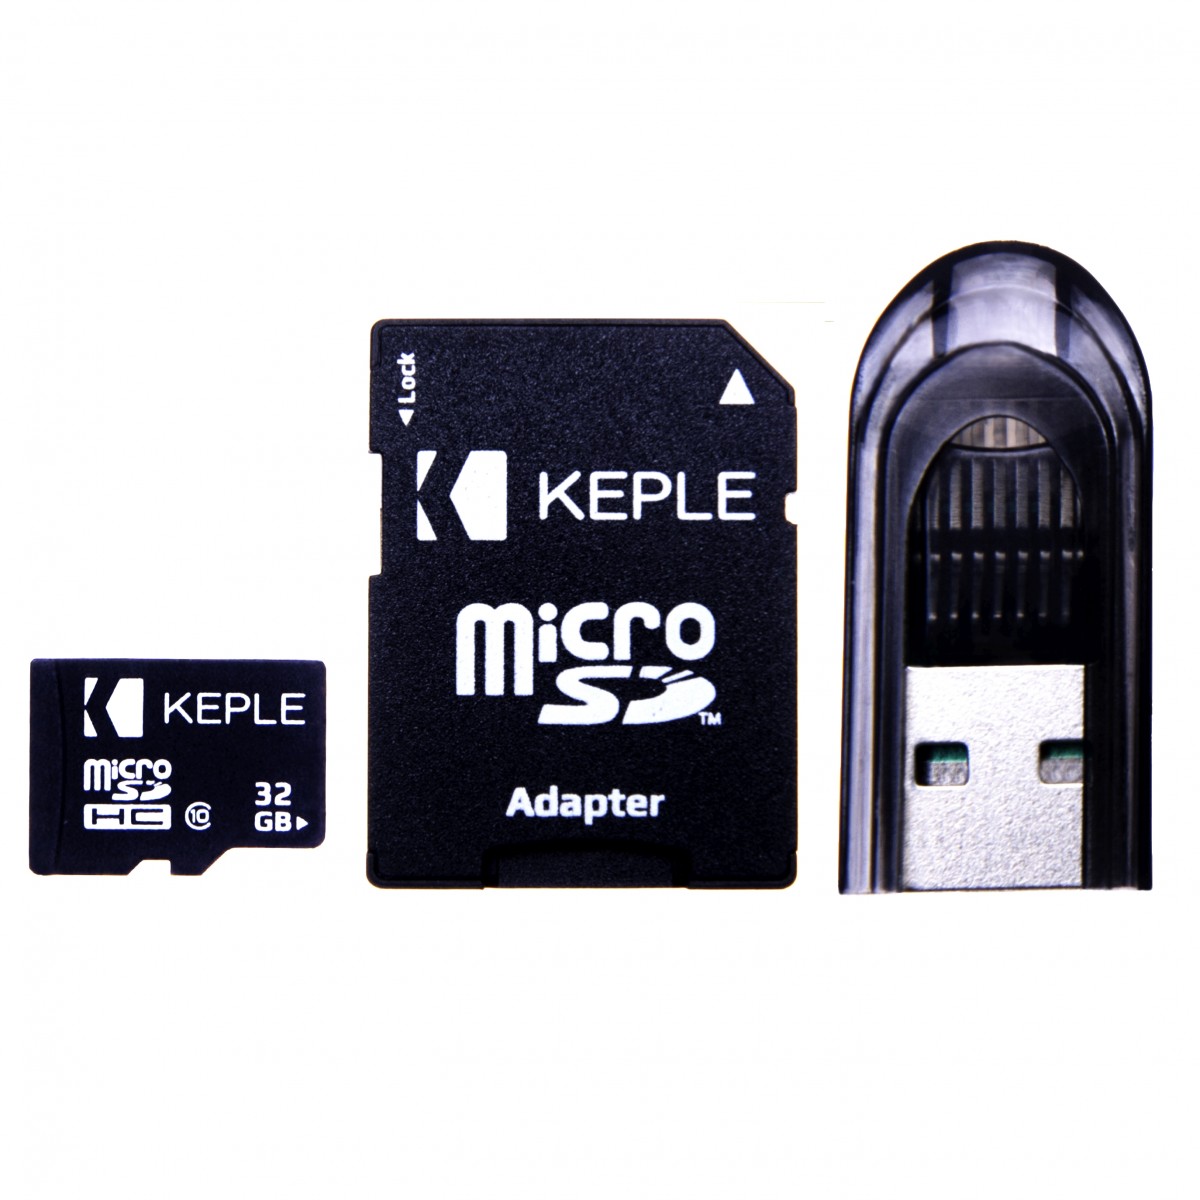 32GB Micro SD Memory Card for Nintendo Switch, Wii Gaming console | Keple.com